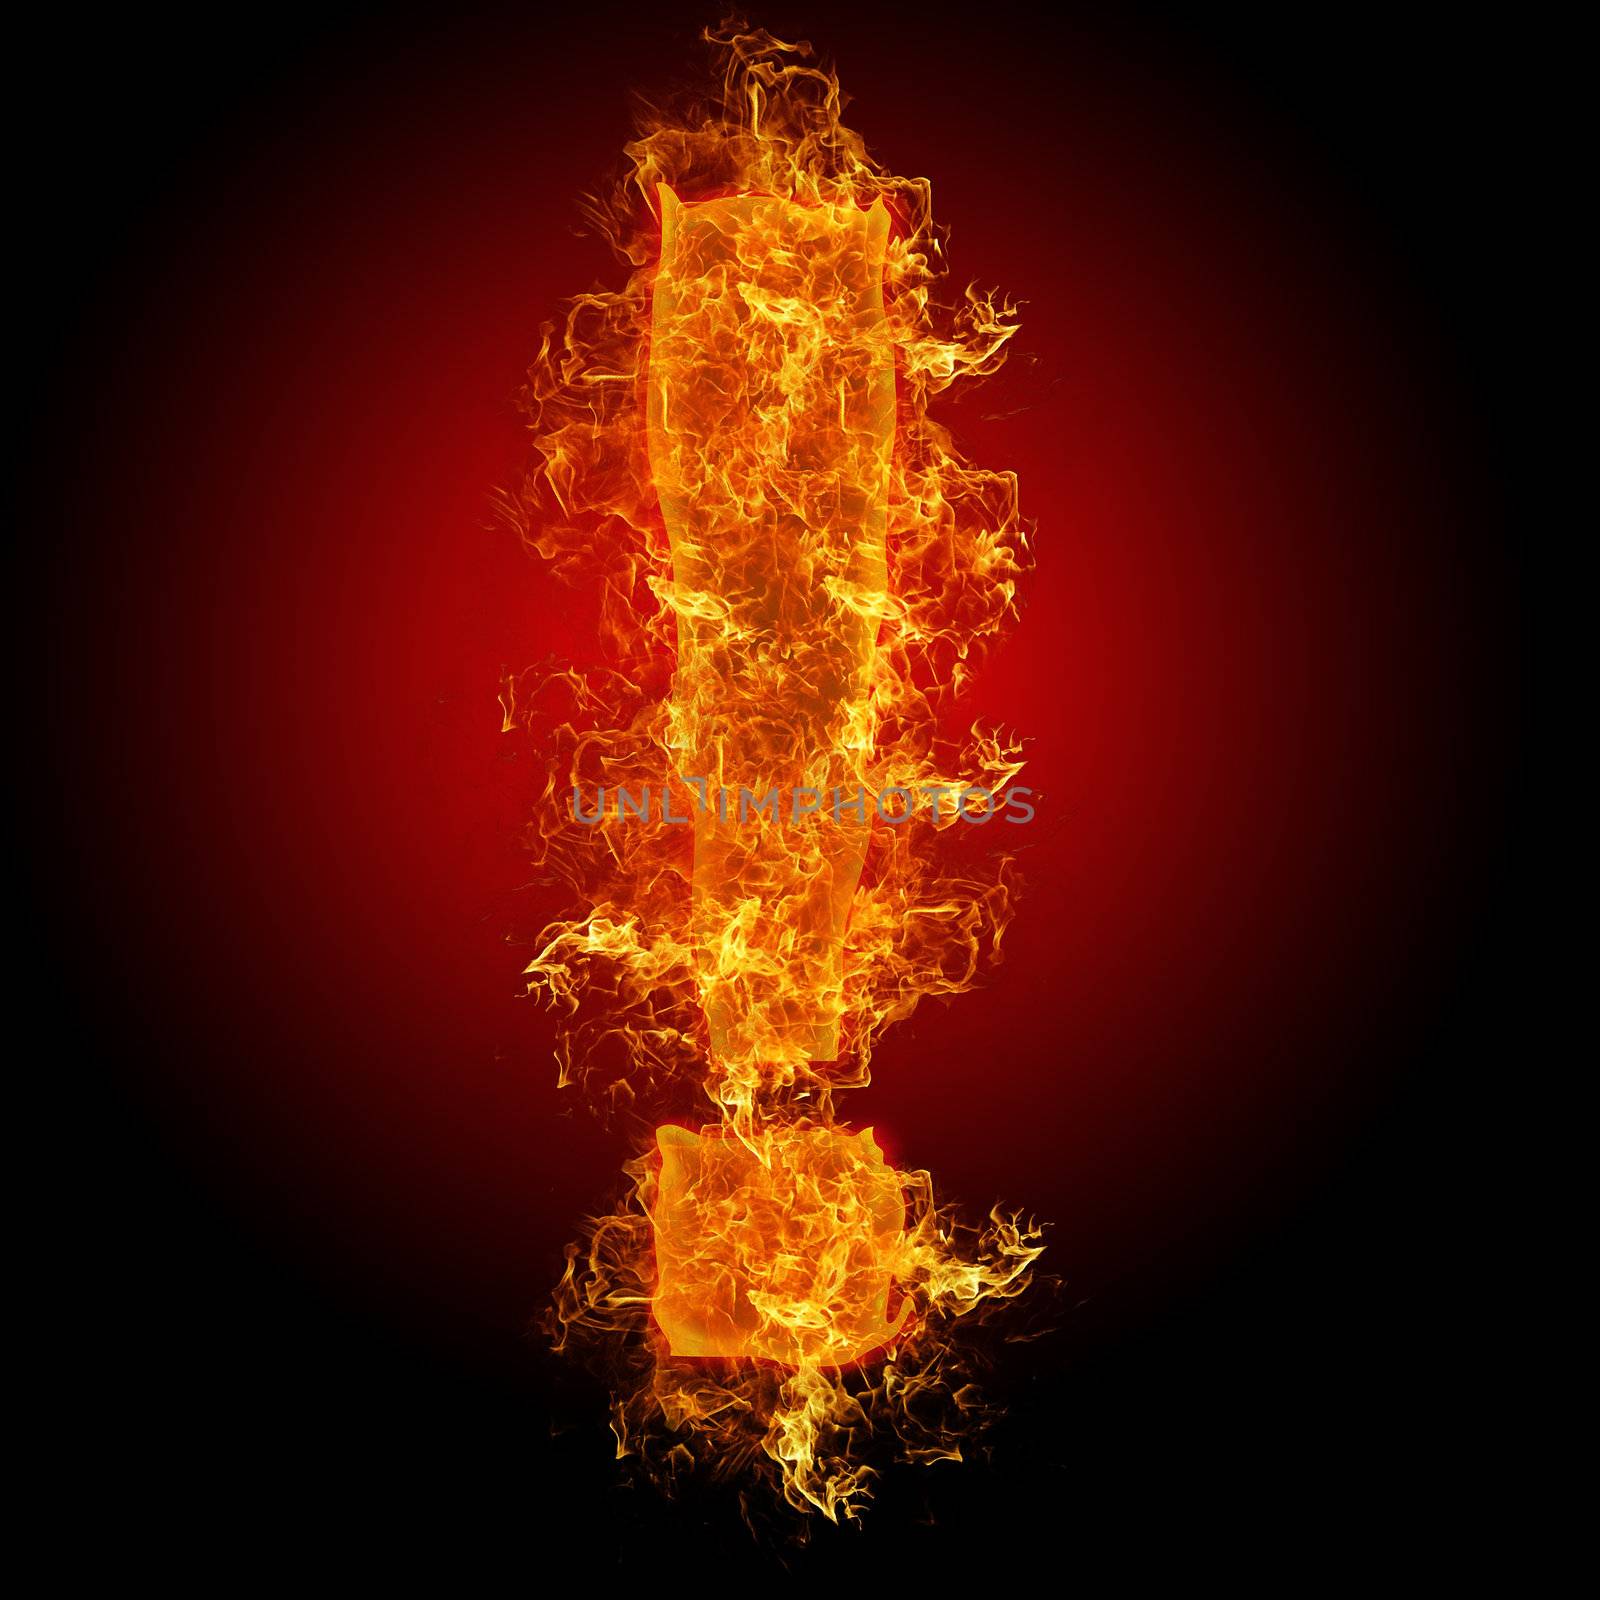 Fire sign query exclamation by rusak